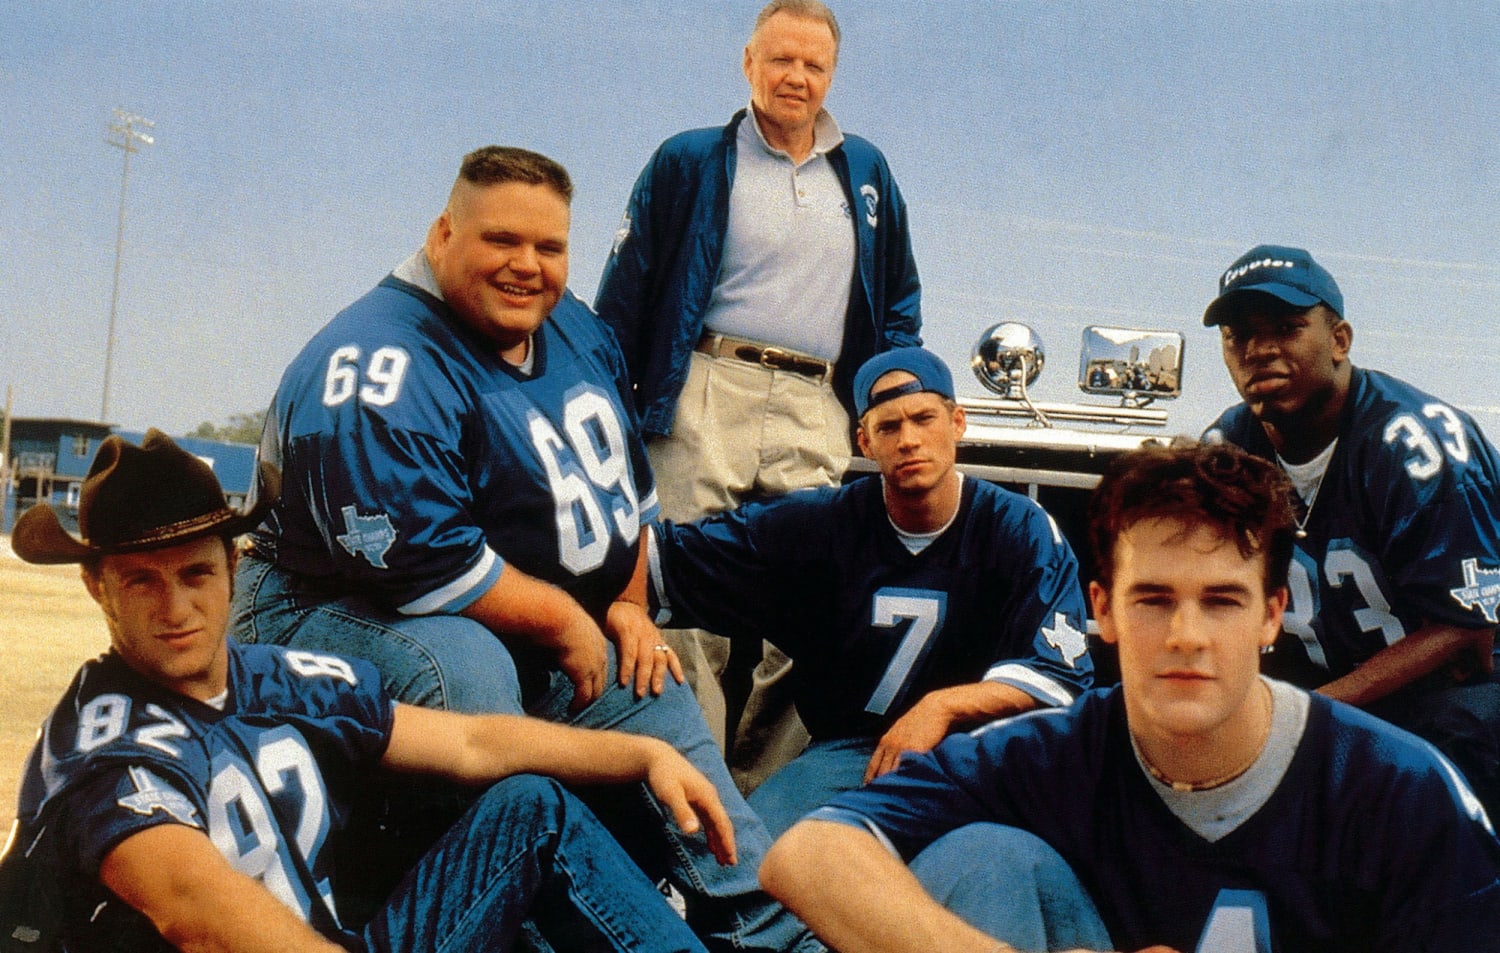 Ron Lester, Actor From 'Varsity Blues,' Dead at 45.